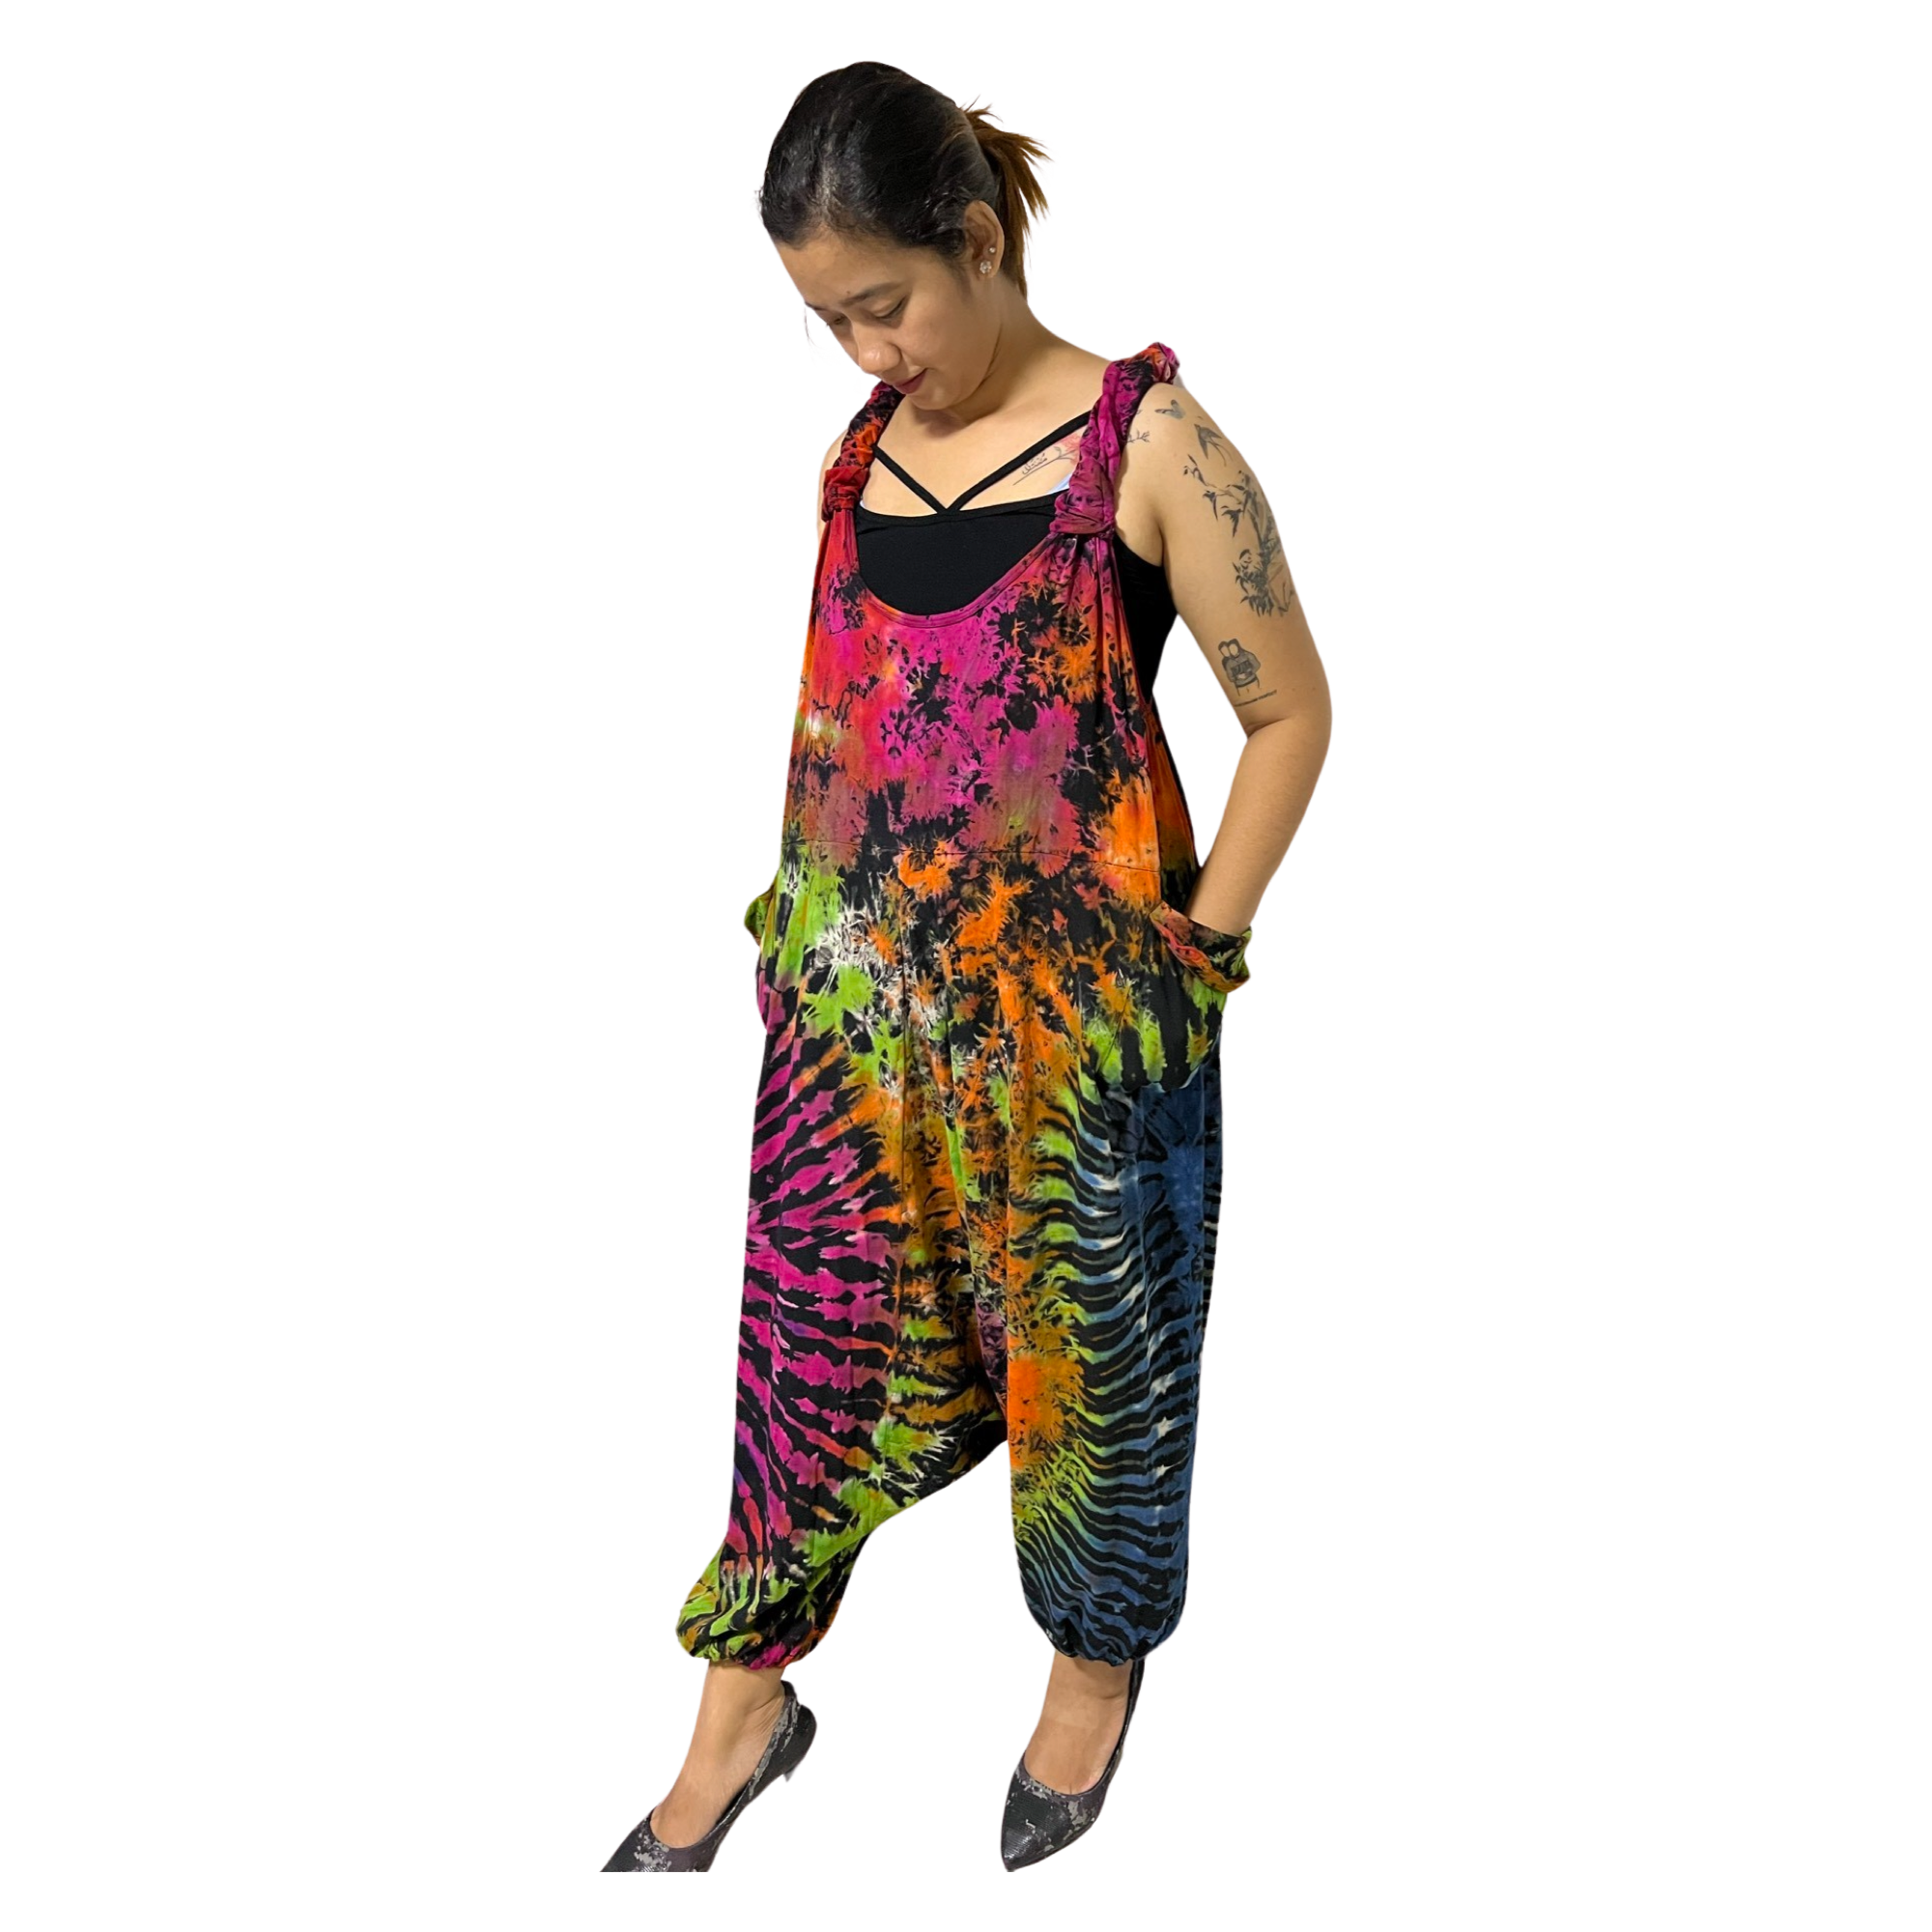 Harem Jumpsuit for Women Retro Tie Dye Loose Sleeveless V Neck Baggy Overalls One Piece Romper Jumpsuits with Pockets, Assorted Colors.